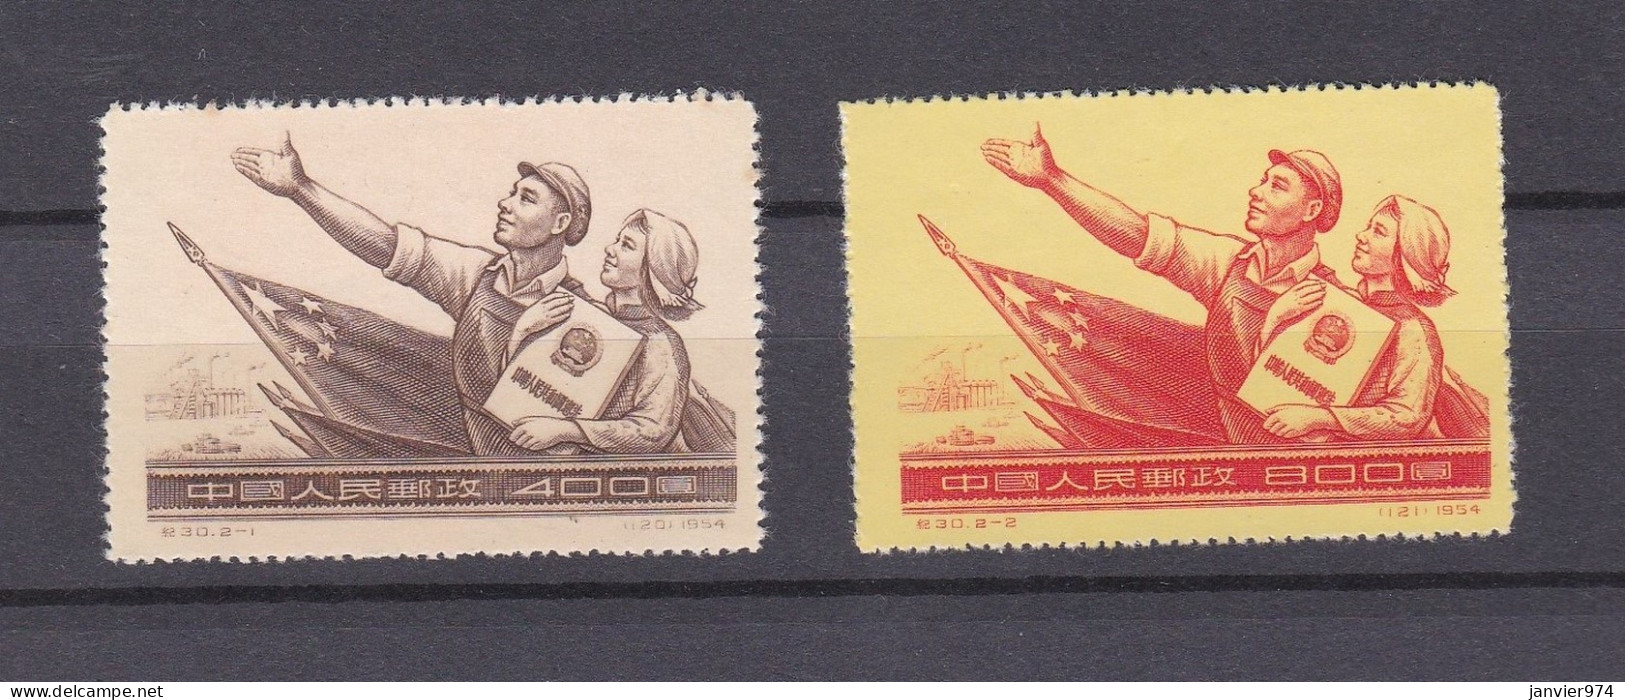 Chine 1954 , La Serie Complete, Nouvelle Constitution , 2 Timbres Neufs , 264 – 264  - Unused Stamps